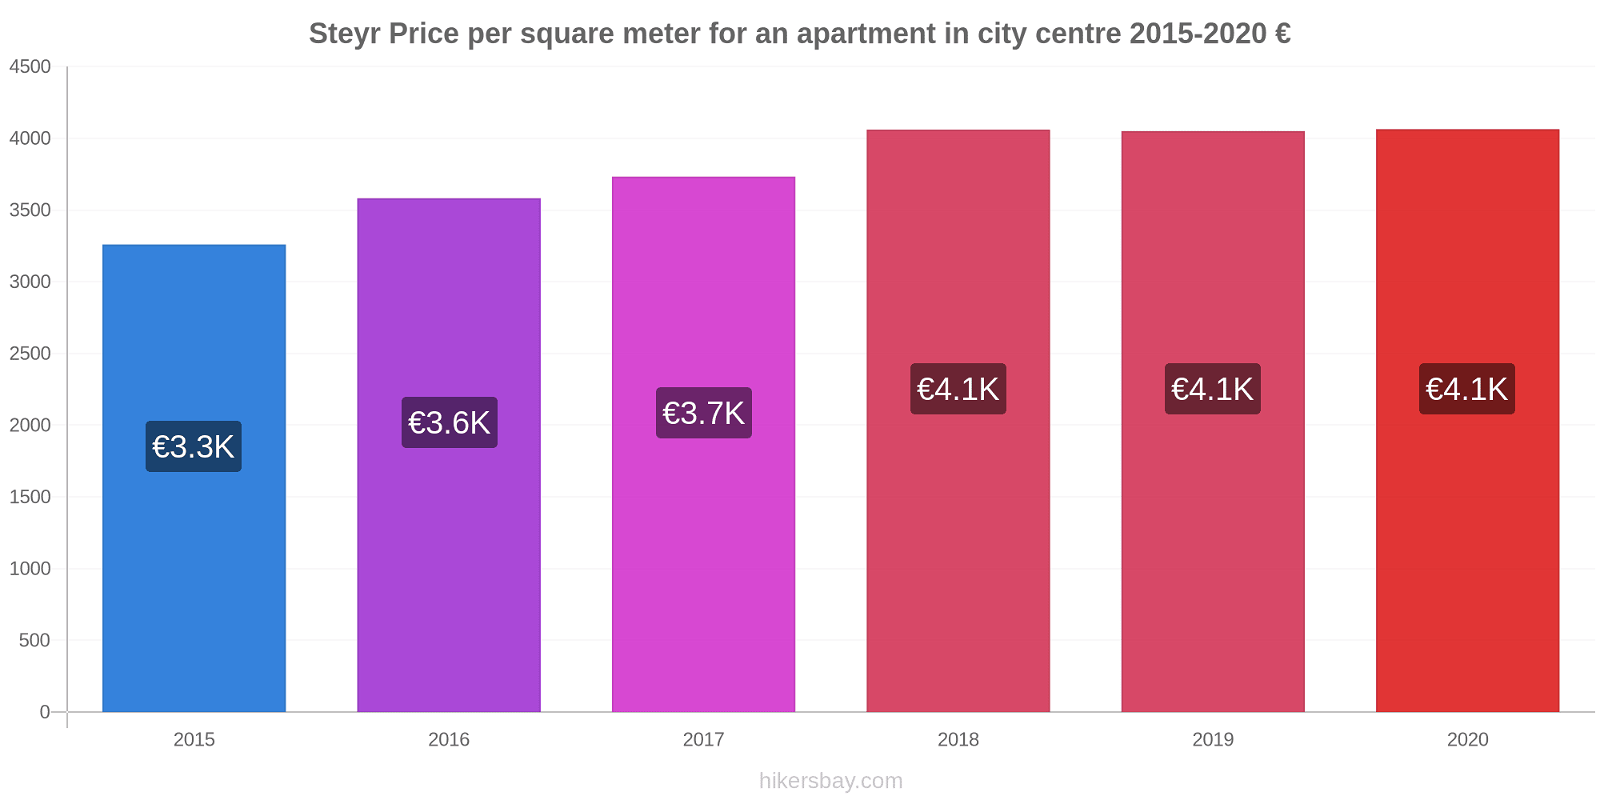 Steyr price changes Price per square meter for an apartment in city centre hikersbay.com